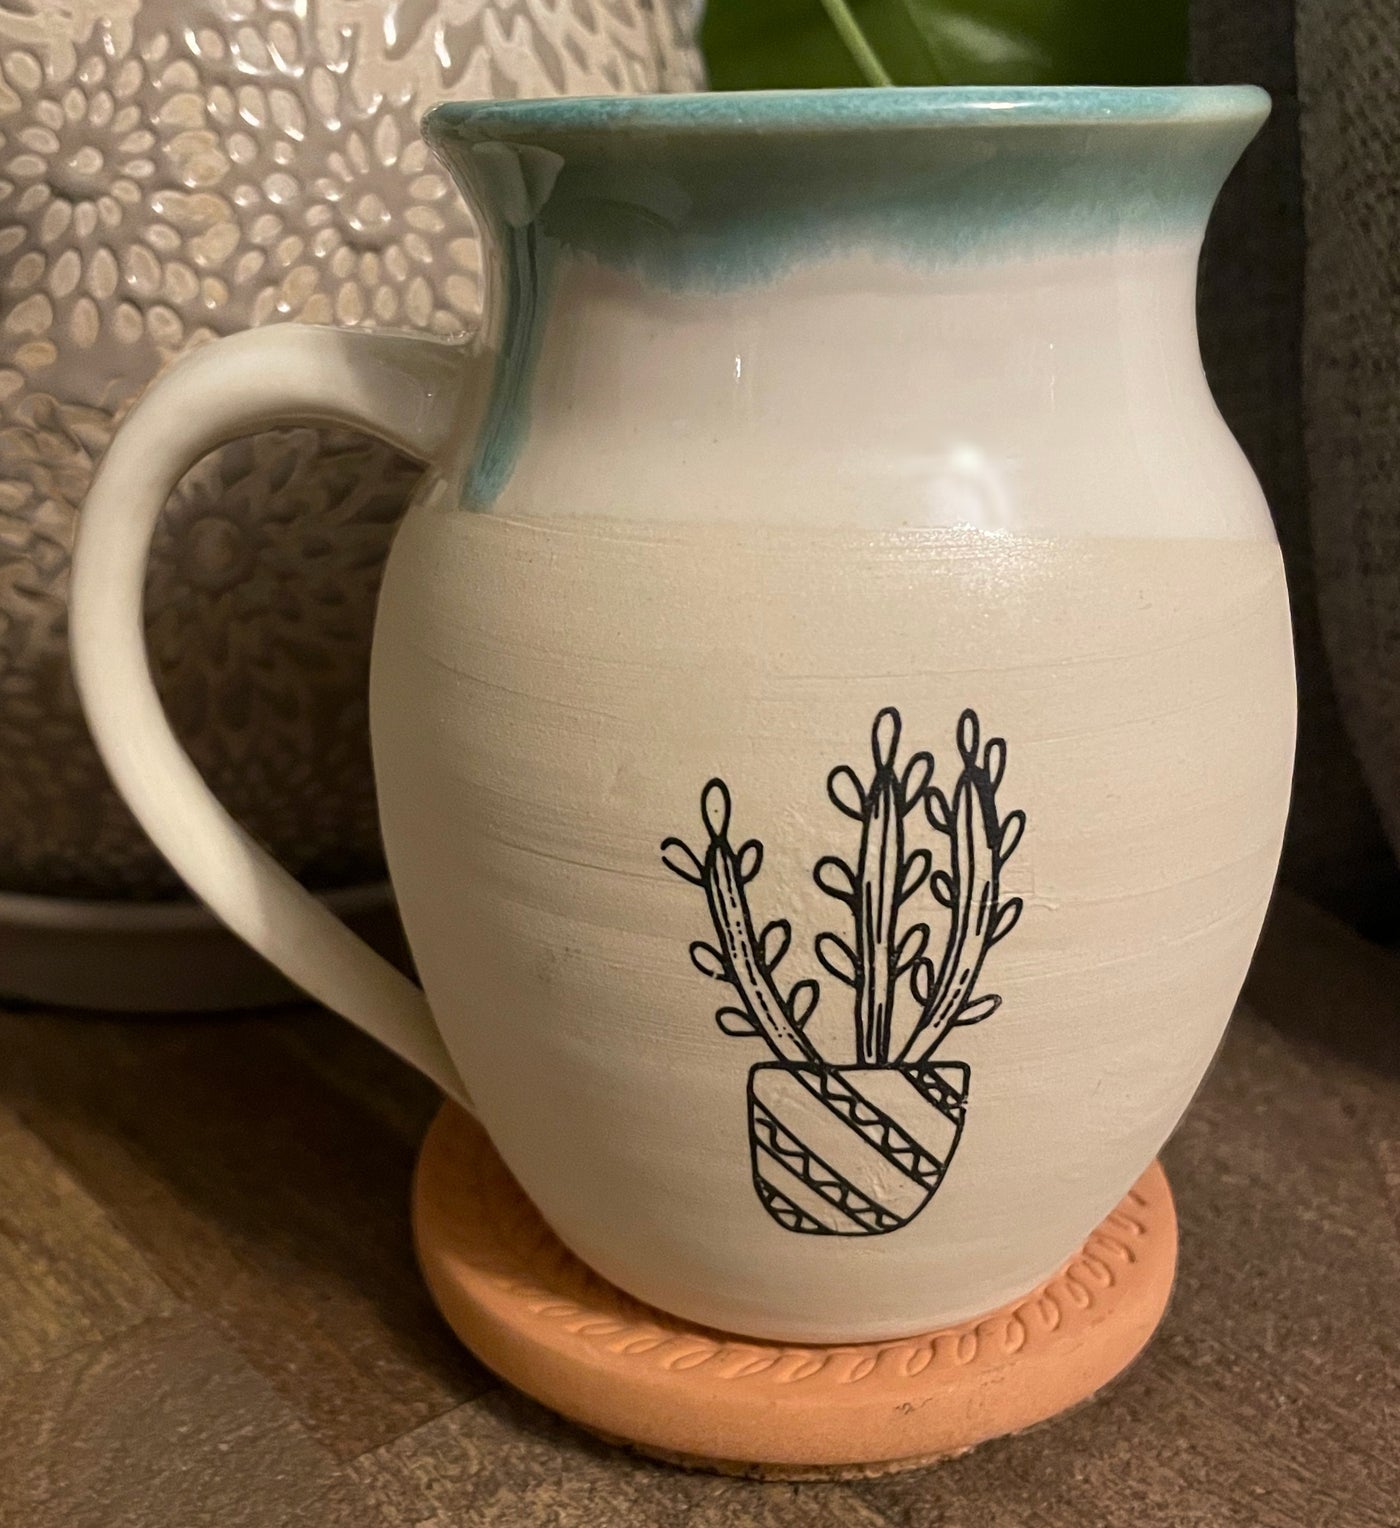 G7 These small batch, handmade mugs are available in blue or green. Each mug is stamped with a unique plant design. Explore the best and coolest gift ideas for plant enthusiasts!